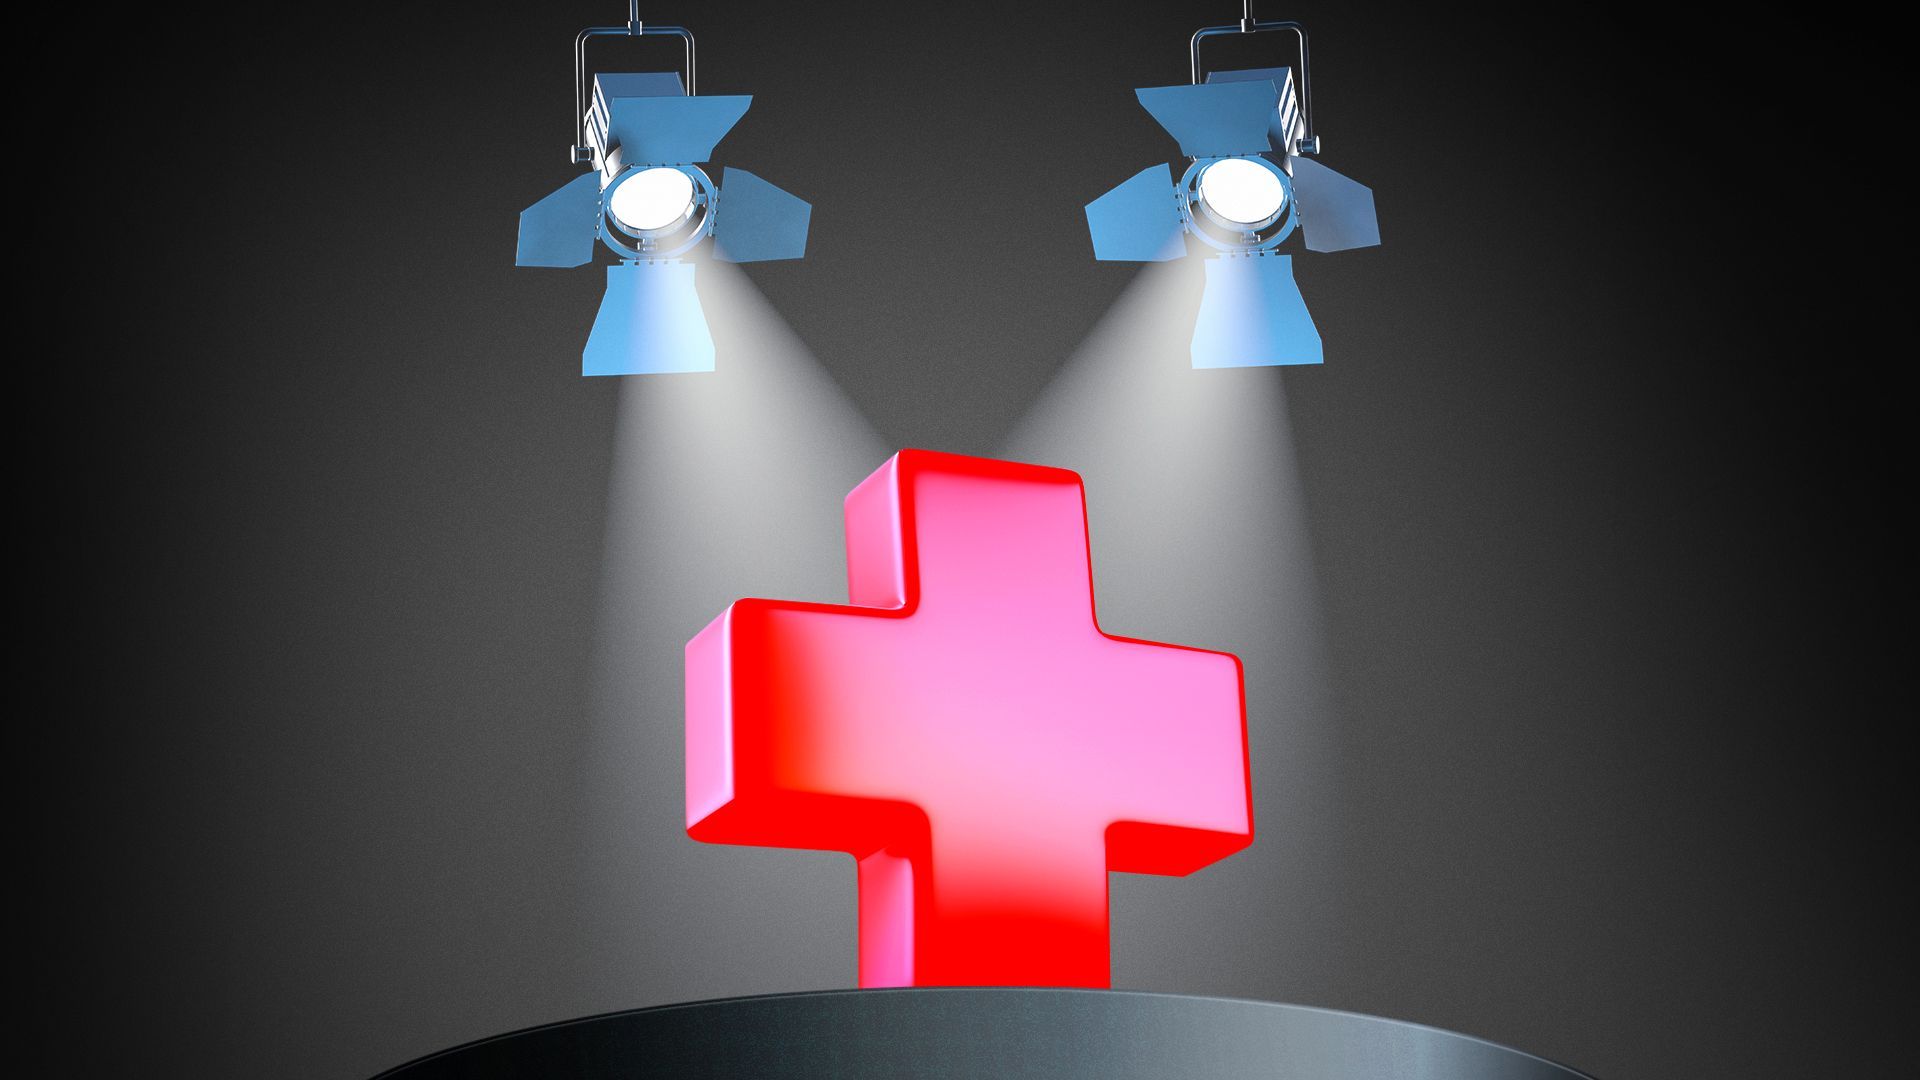 Illustration of a medical red cross under spotlights on a stage.